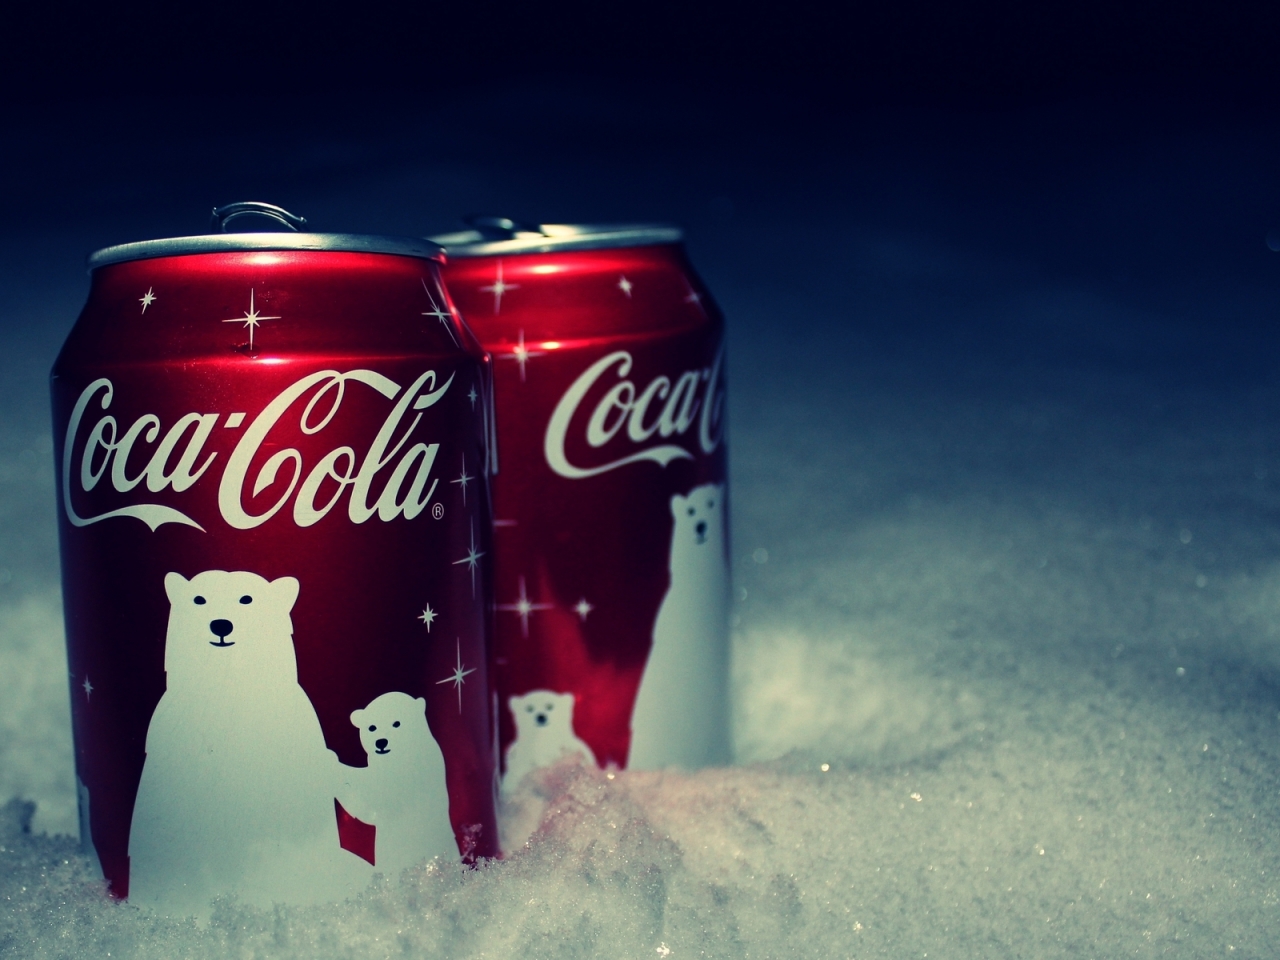 CocaCola for Christmas for 1280 x 960 resolution